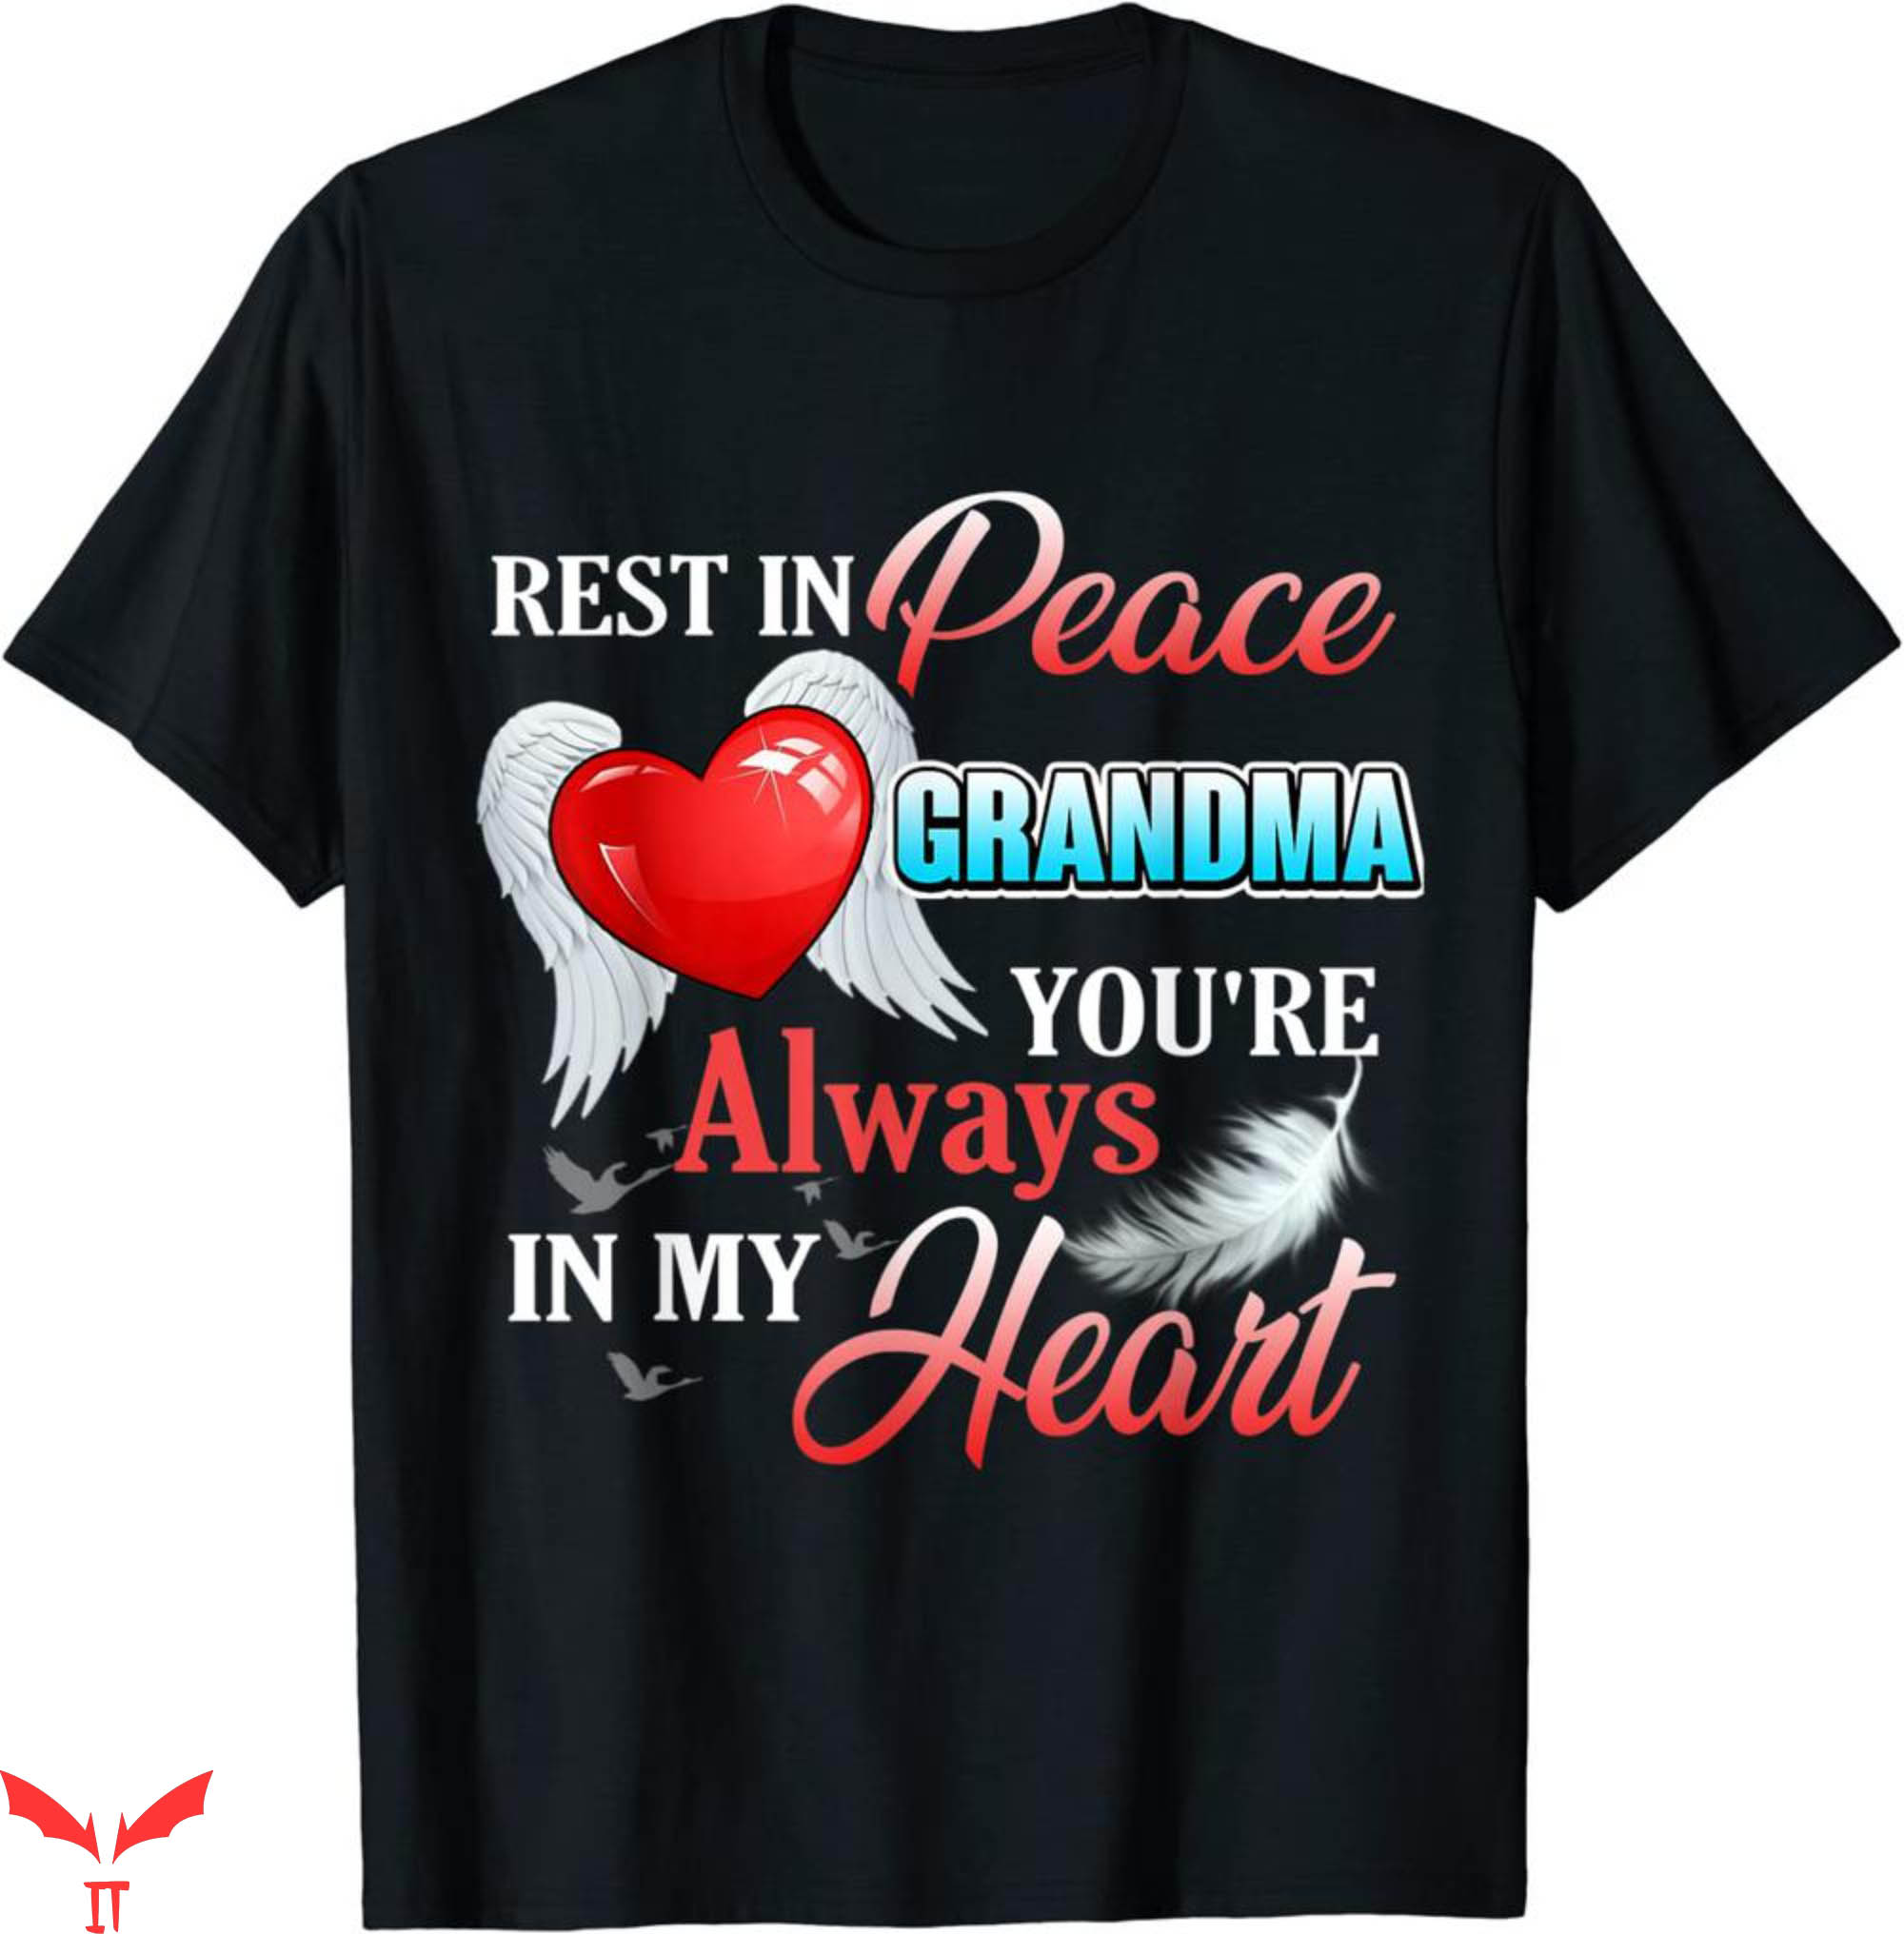 Rest In Peace T-Shirt You're Always In My Heart Loss Grandma